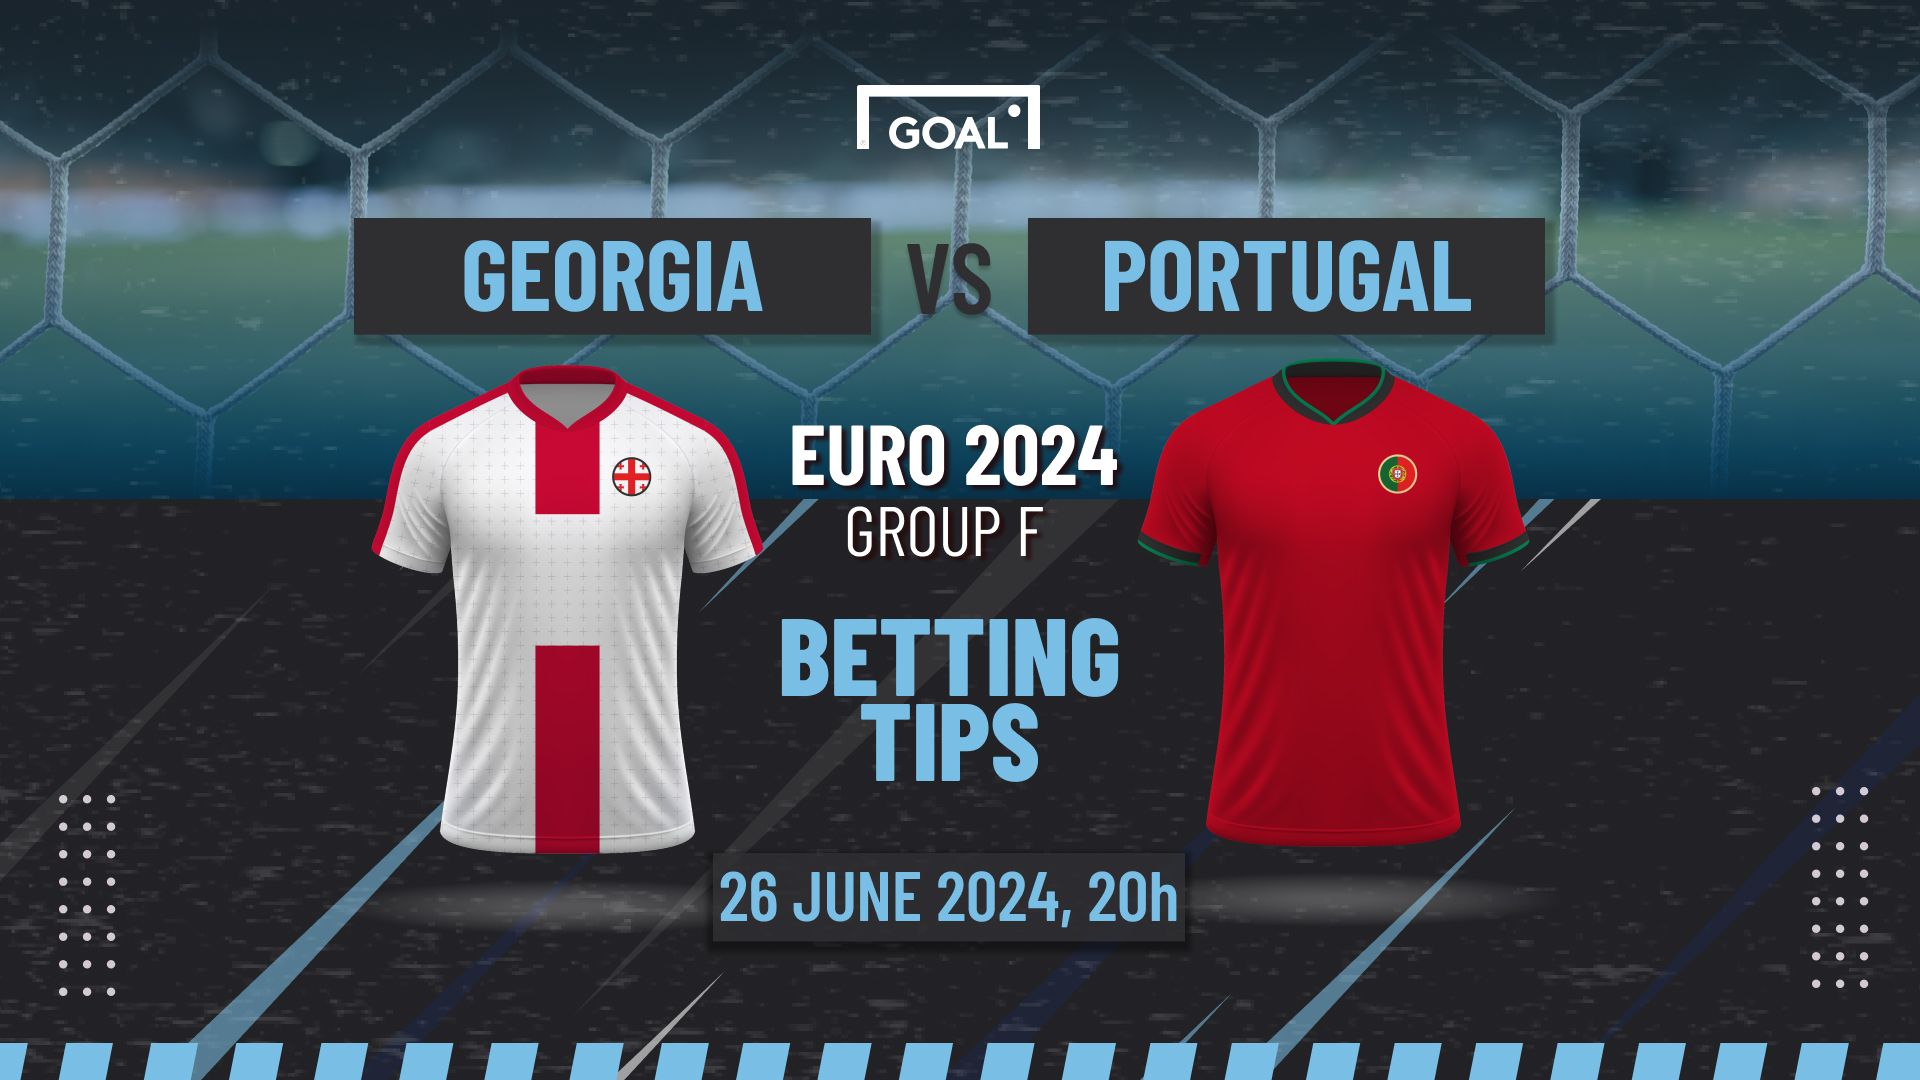 Georgia vs Portugal: Euro 2024 Group F Preview and Betting Tips